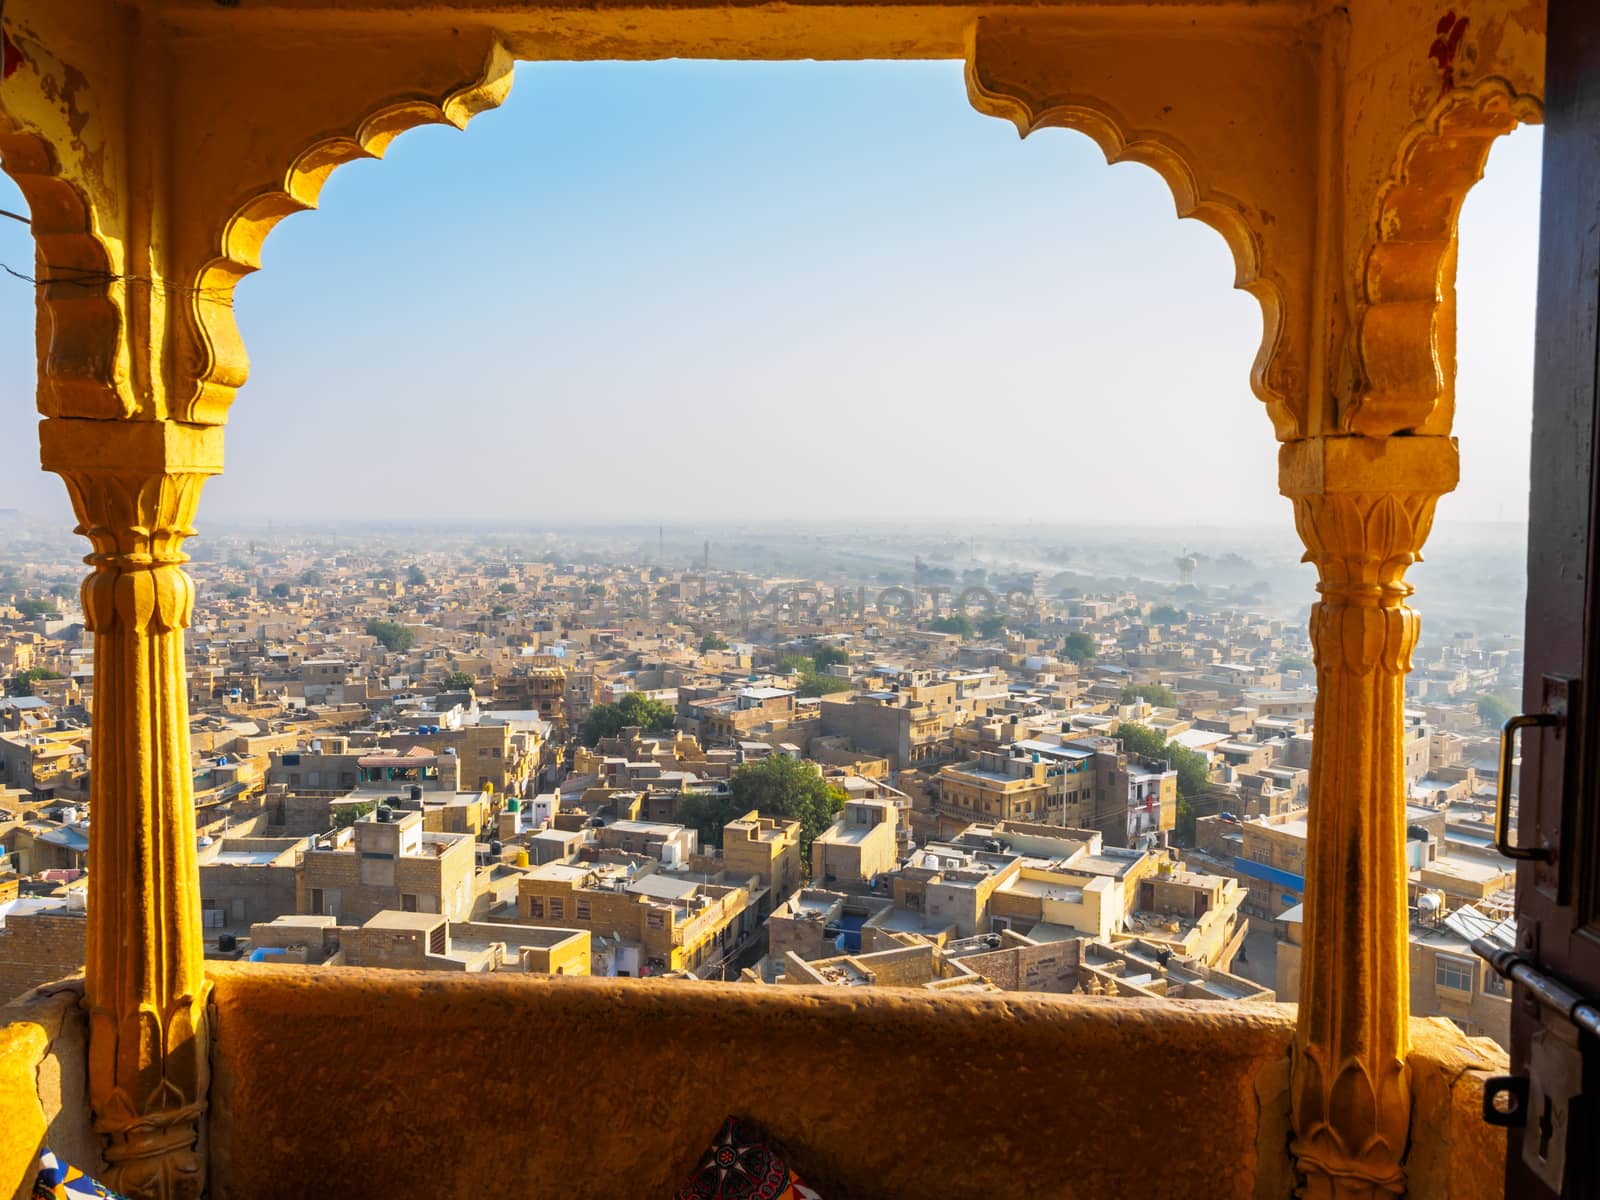 Townscape view from Jaisalmer Fort, Rajasthan, India